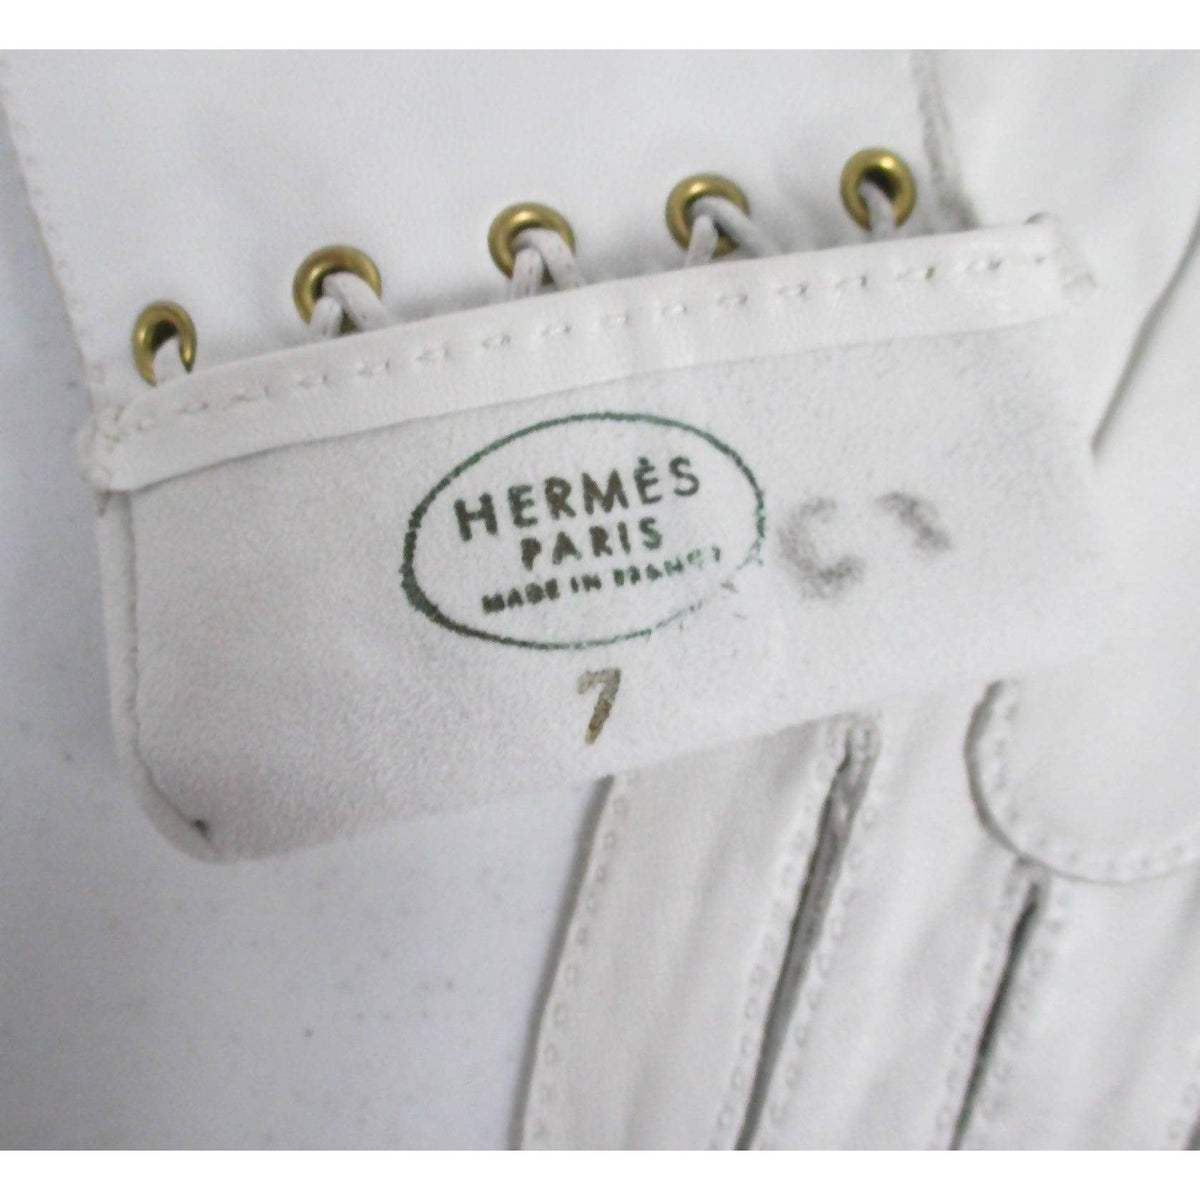 Pre-Owned HERMES White Leather Lace Up Gloves | Size 7 - theREMODA